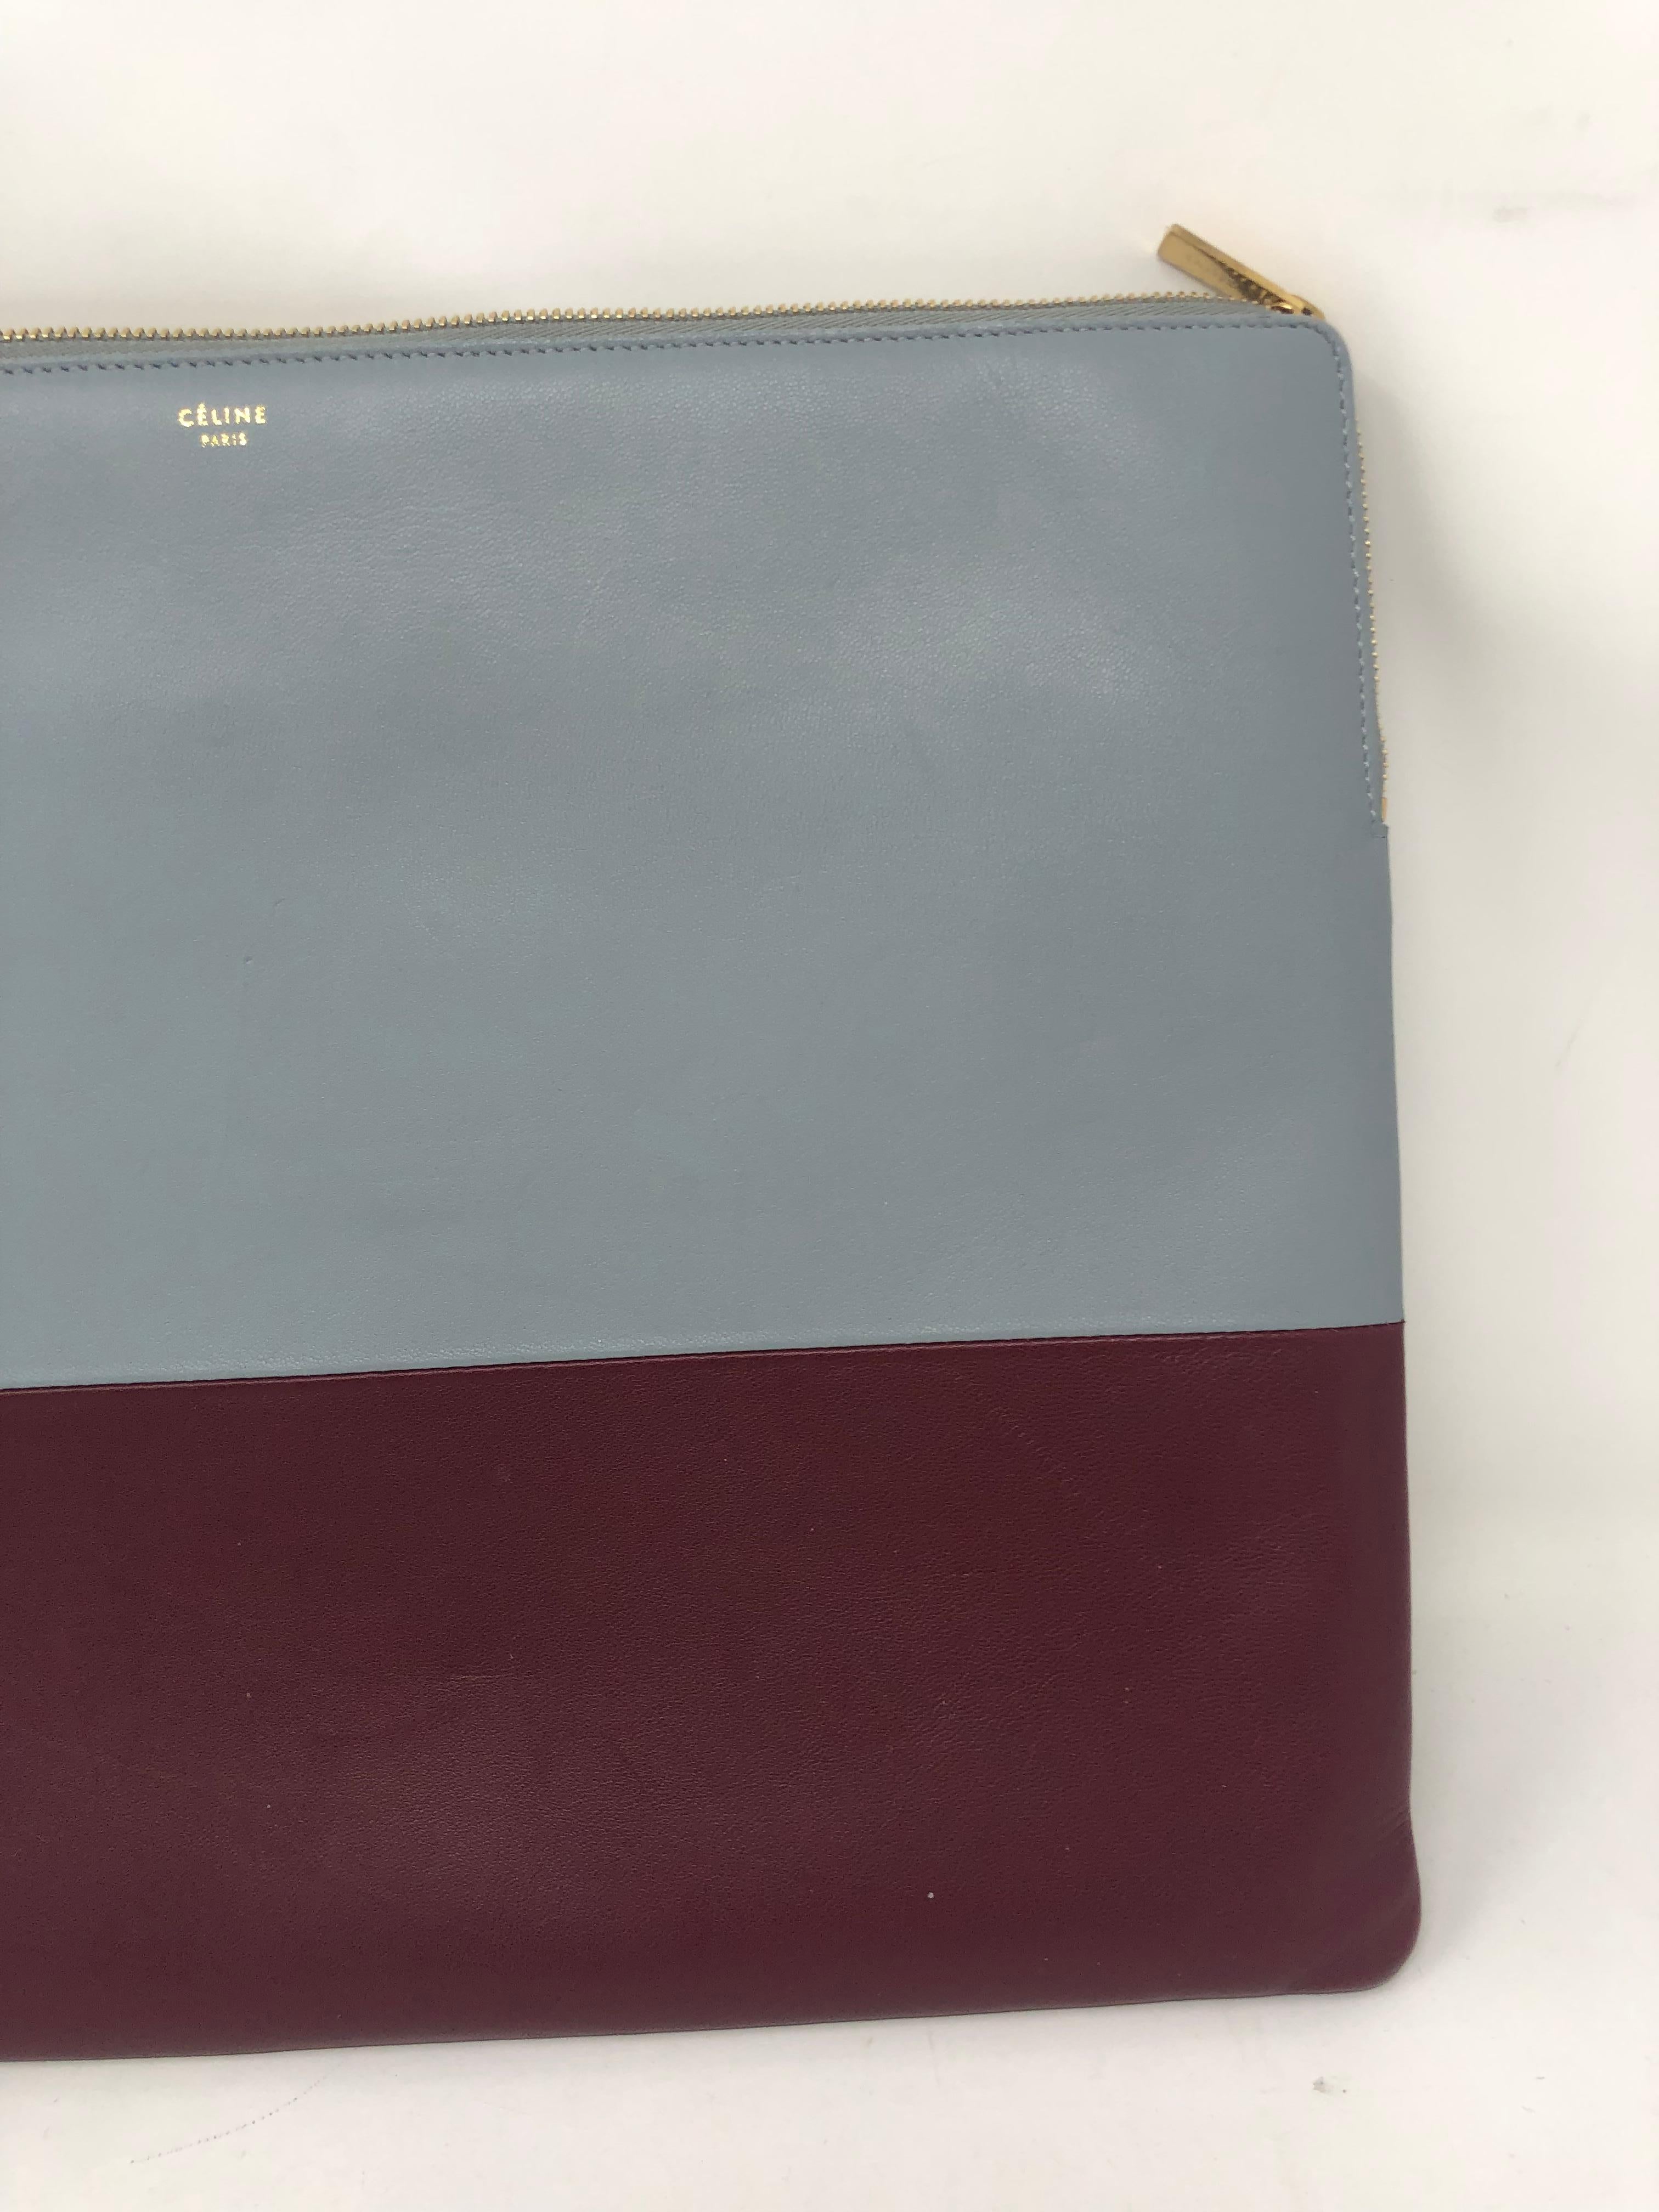 Celine two-tone leather clutch. Light blue and burgundy color. Gold hardware. Can hold a laptop. Nice work bag or evening clutch.  Good condition. Guaranteed authentic. 